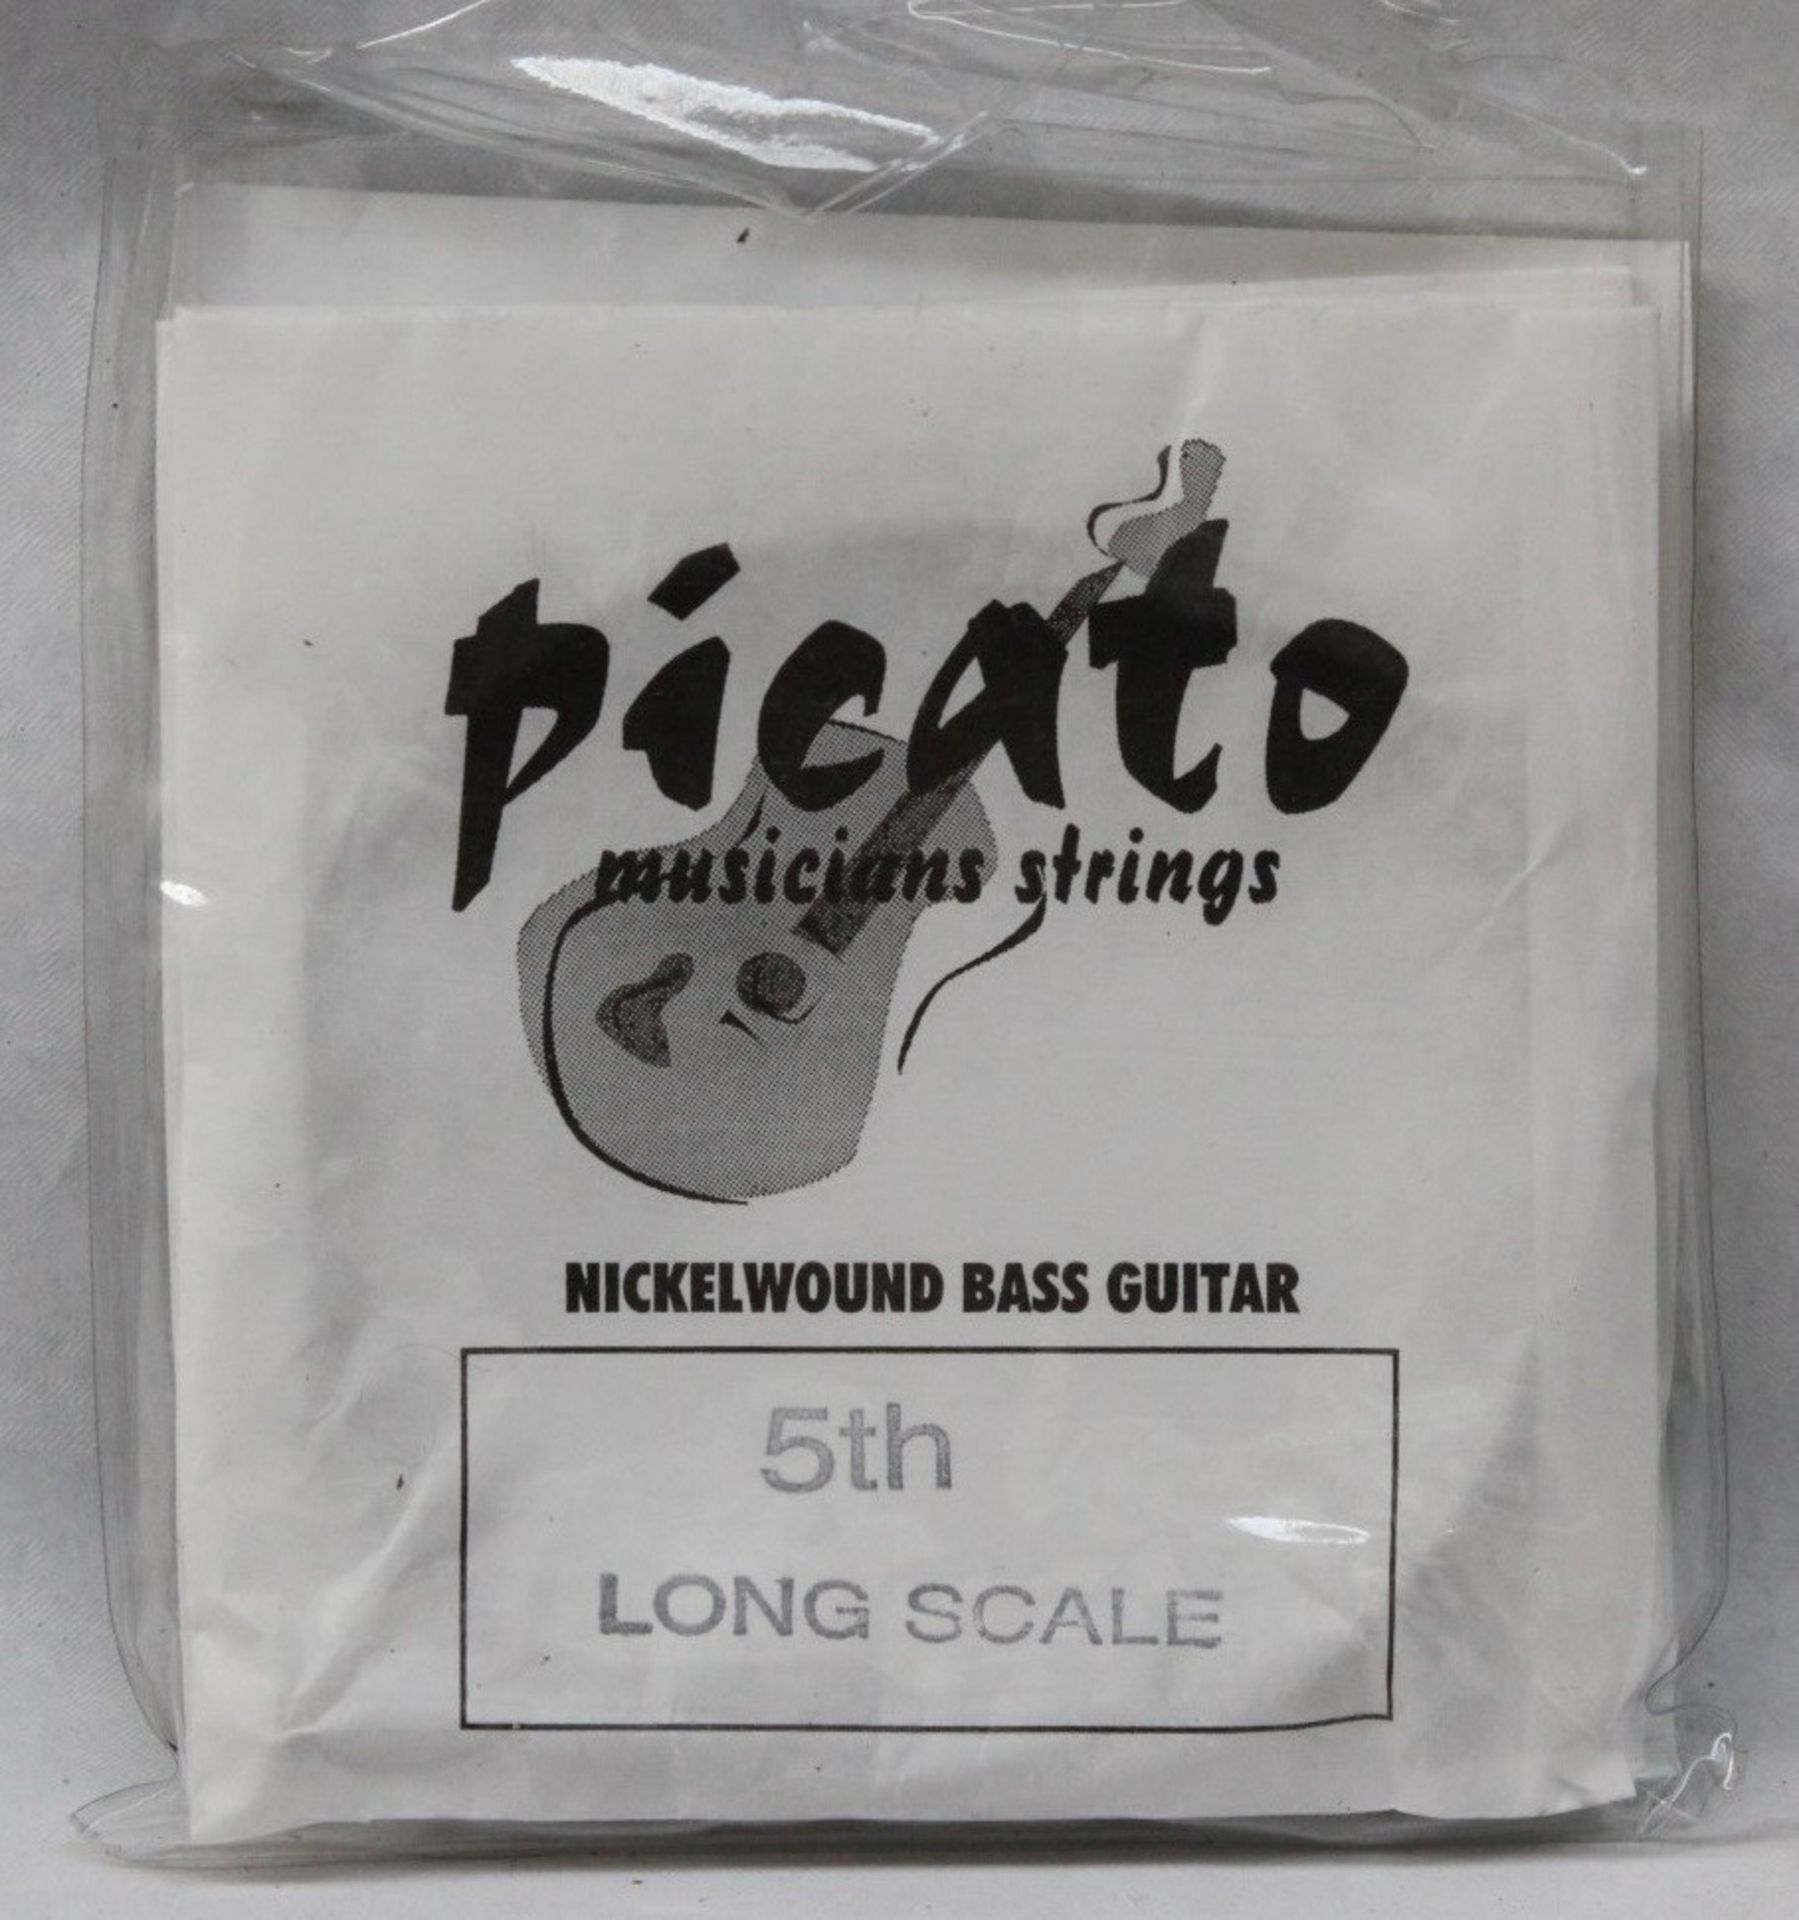 1 x Set of Picato 735's Nickel Roundwould Longscale 5 String Bass Strings - Made in the UK - Brand - Image 2 of 2